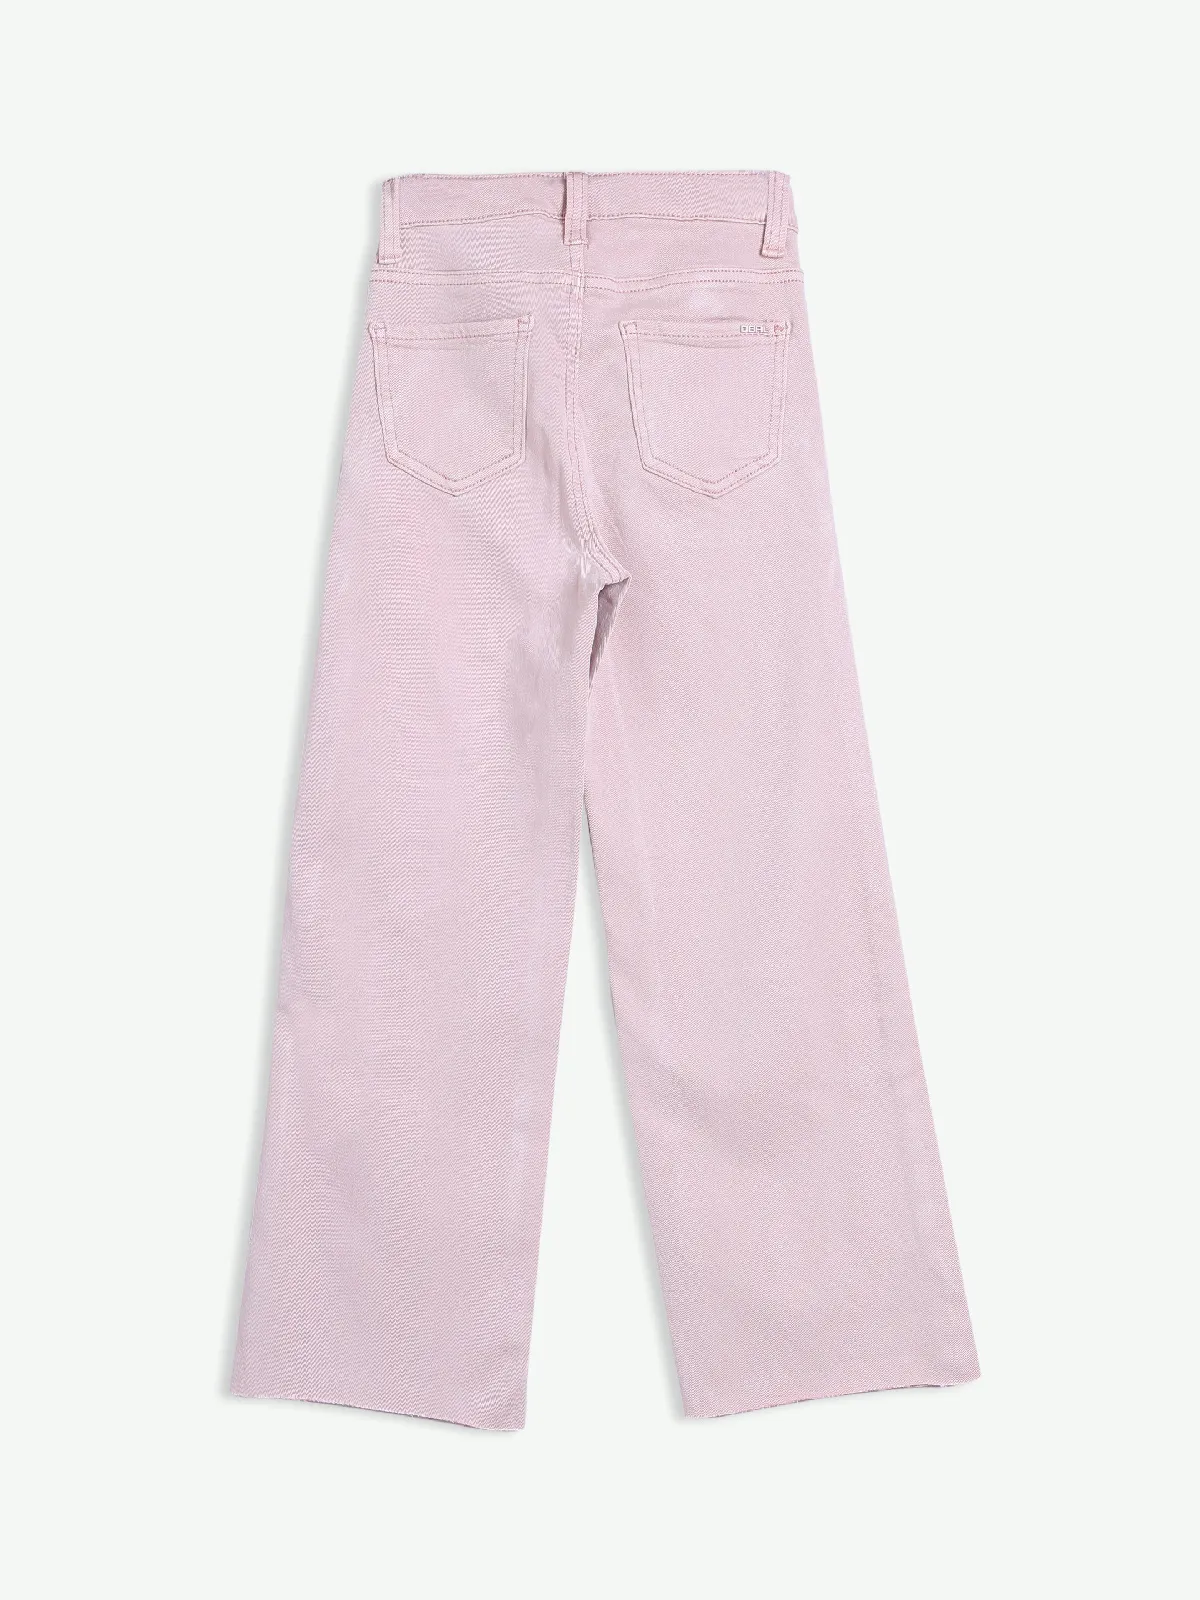 Deal baby pink solid straight jeans